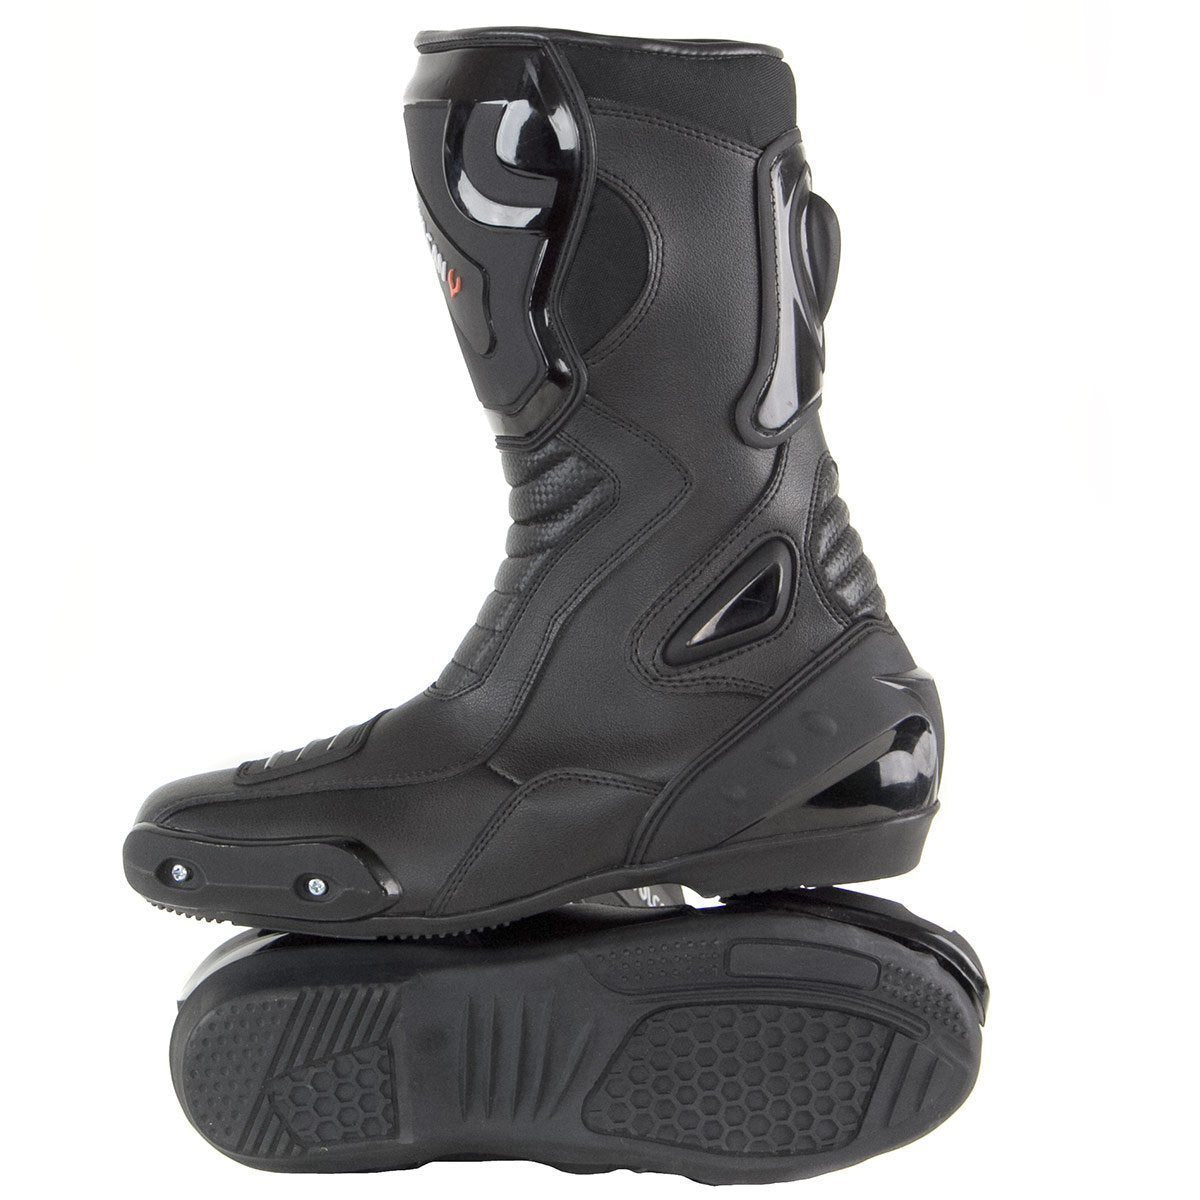 Vulcan V300 Men's 'Velocity' Black Leather Motorcycle Racing Sport Boots with Shift Protection